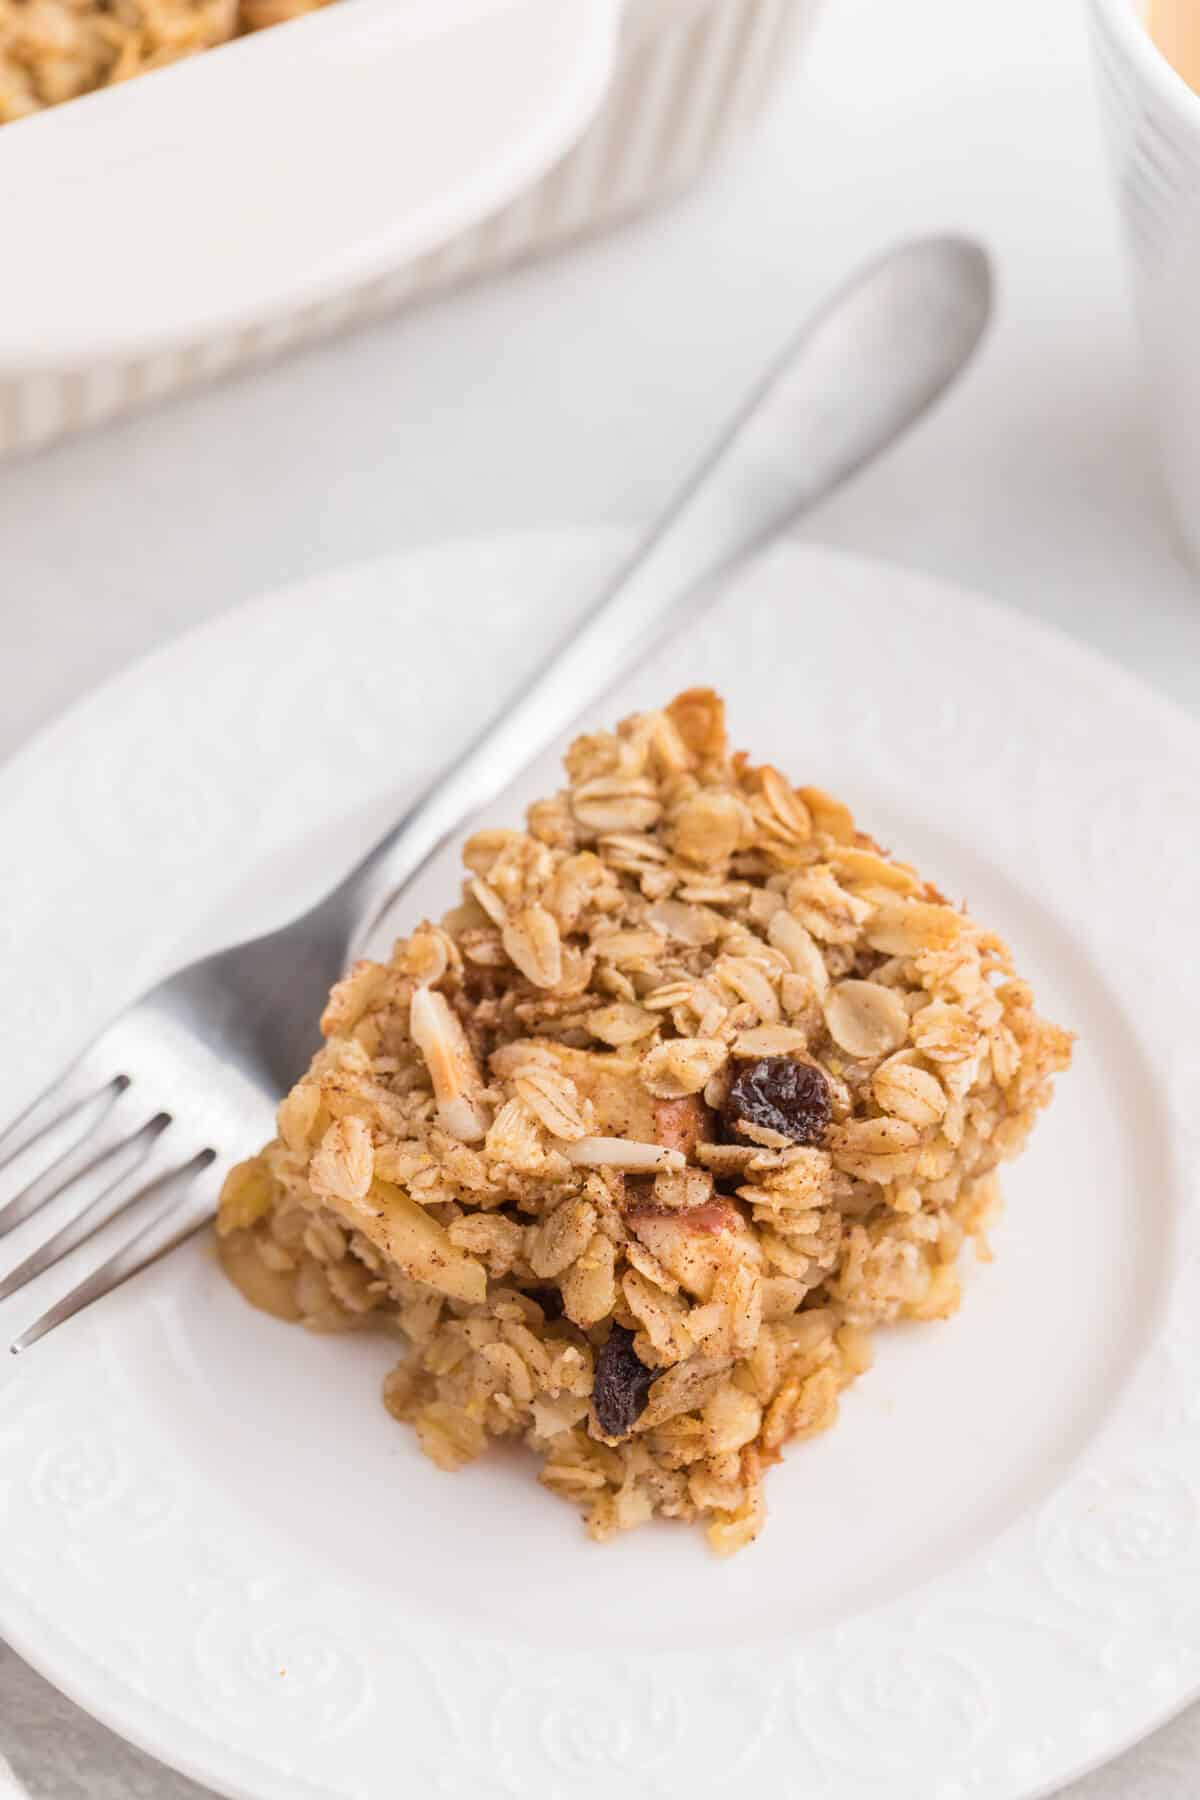 A slice of baked oatmeal on a plate with a fork.